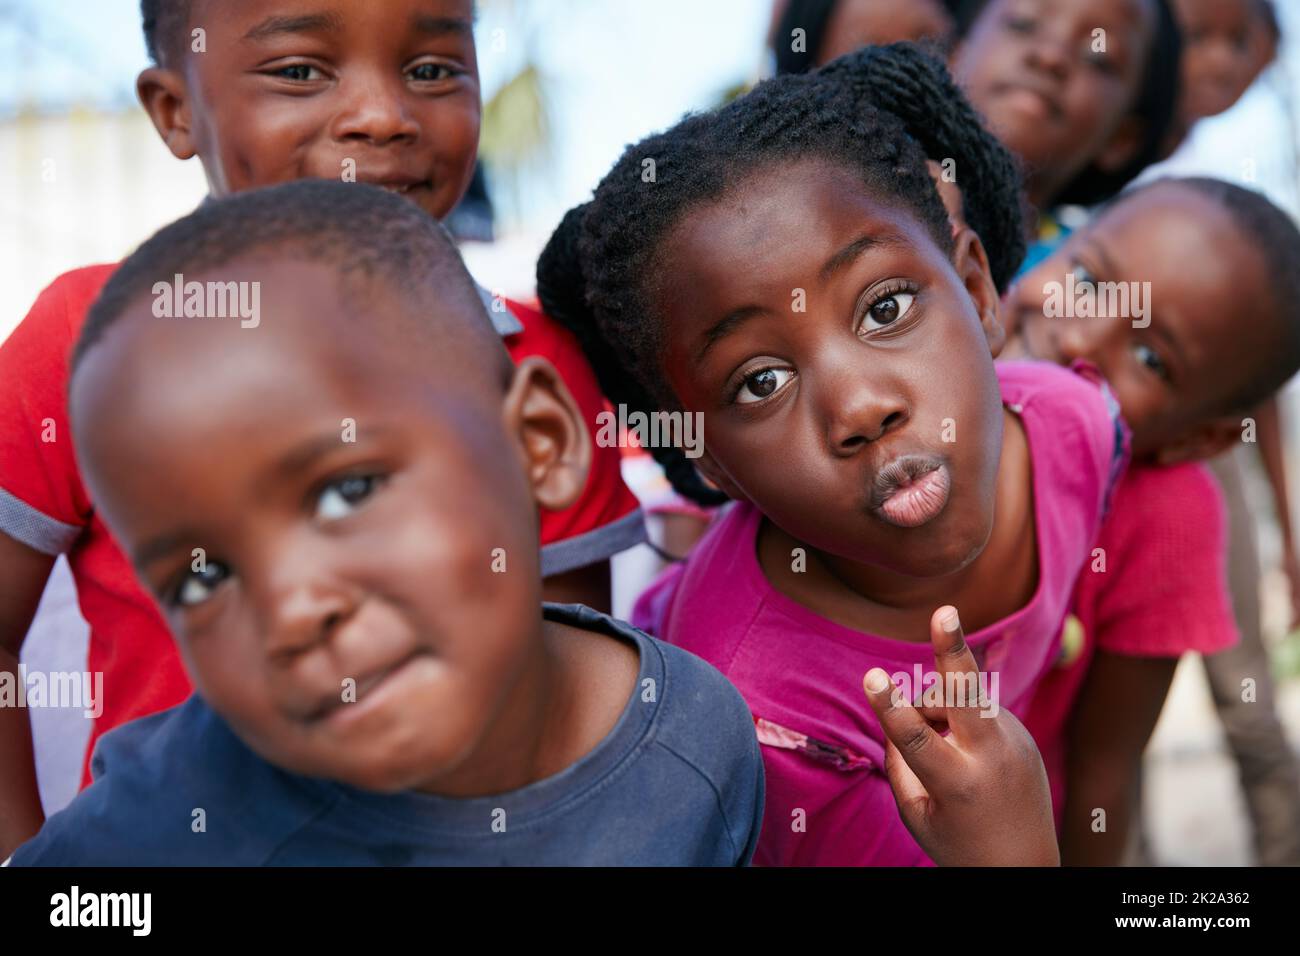 Young and full of life. Shot of kids at a community outreach event. Stock Photo